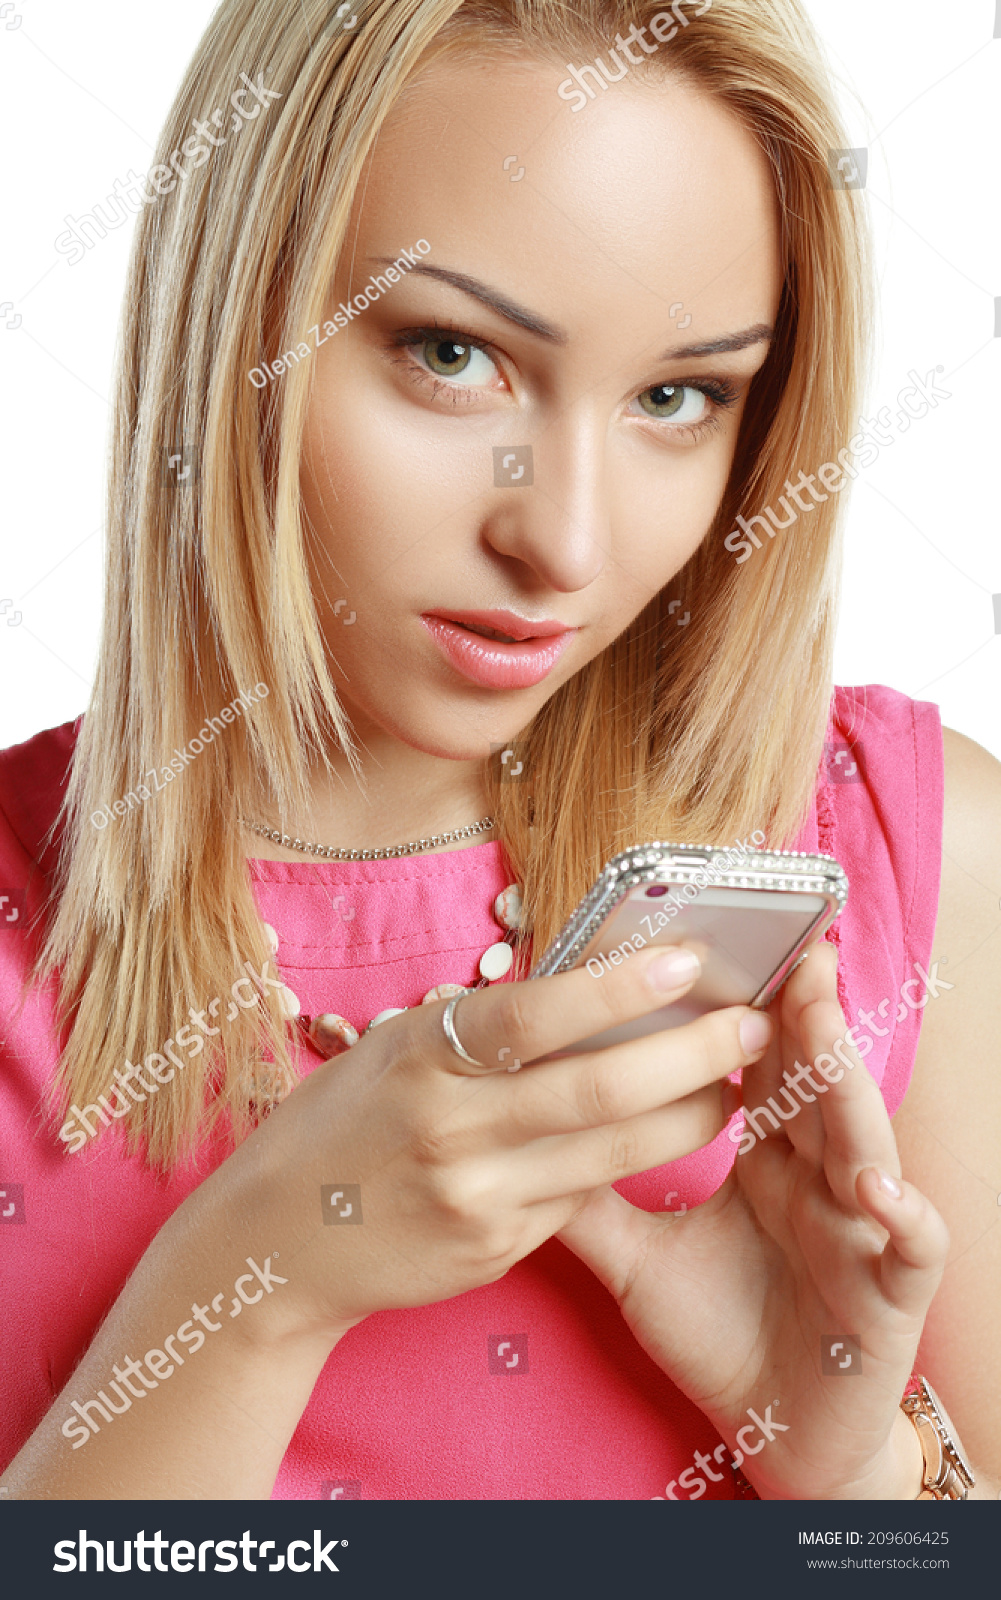 Beautiful Blonde Using Mobile Telephone Or Royalty Free Stock Photo